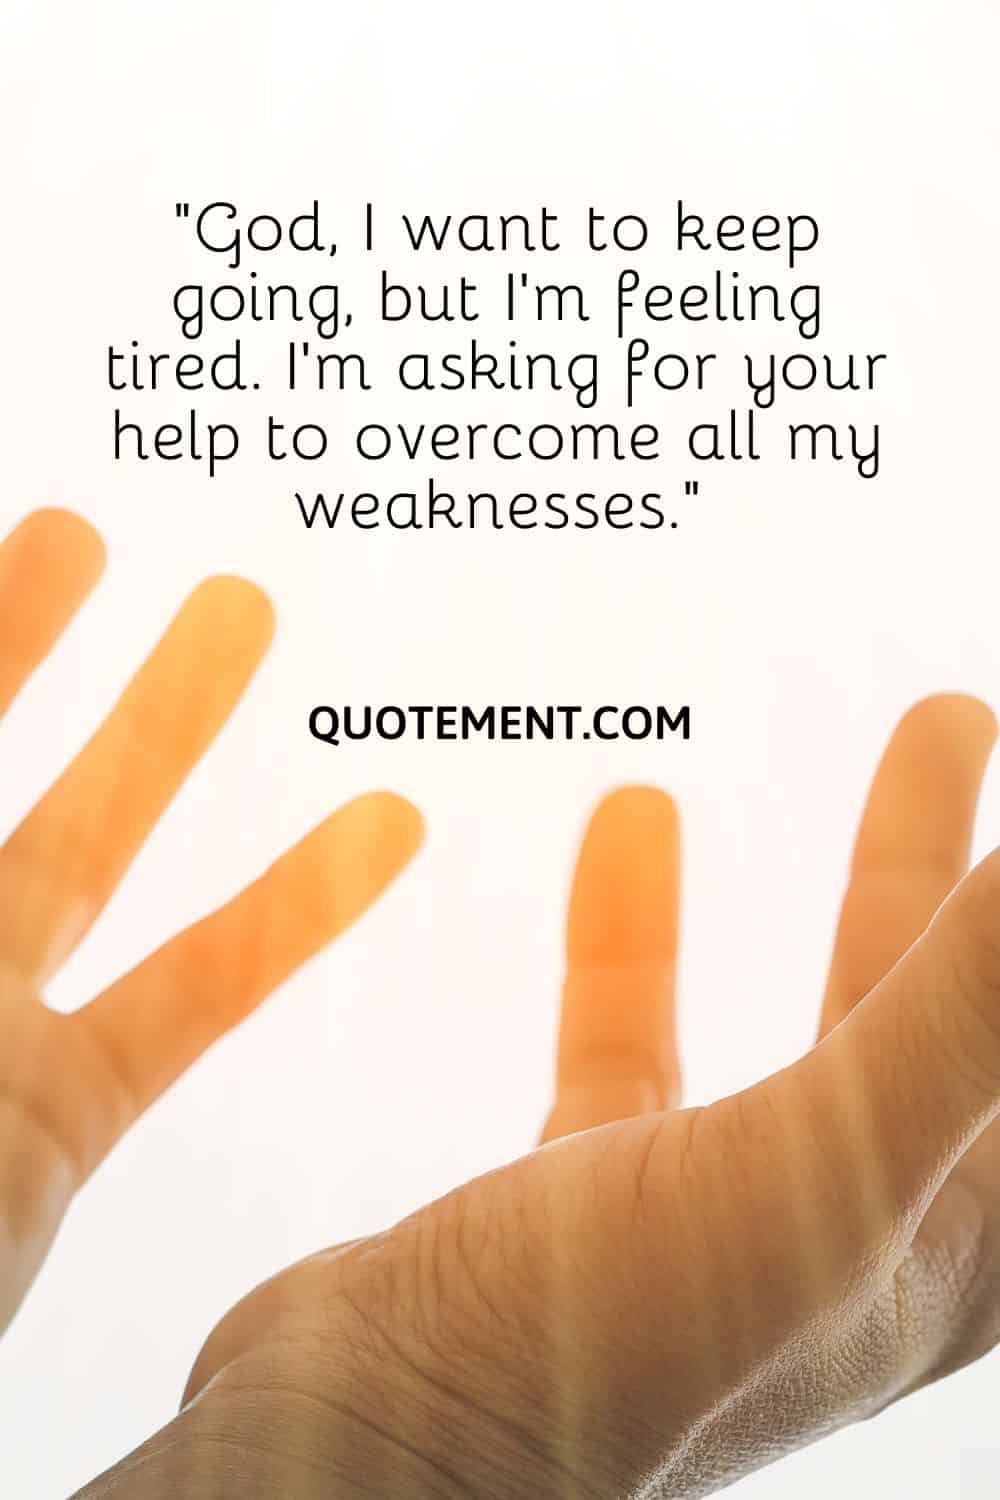 “God, I want to keep going, but I’m feeling tired. I’m asking for your help to overcome all my weaknesses.”